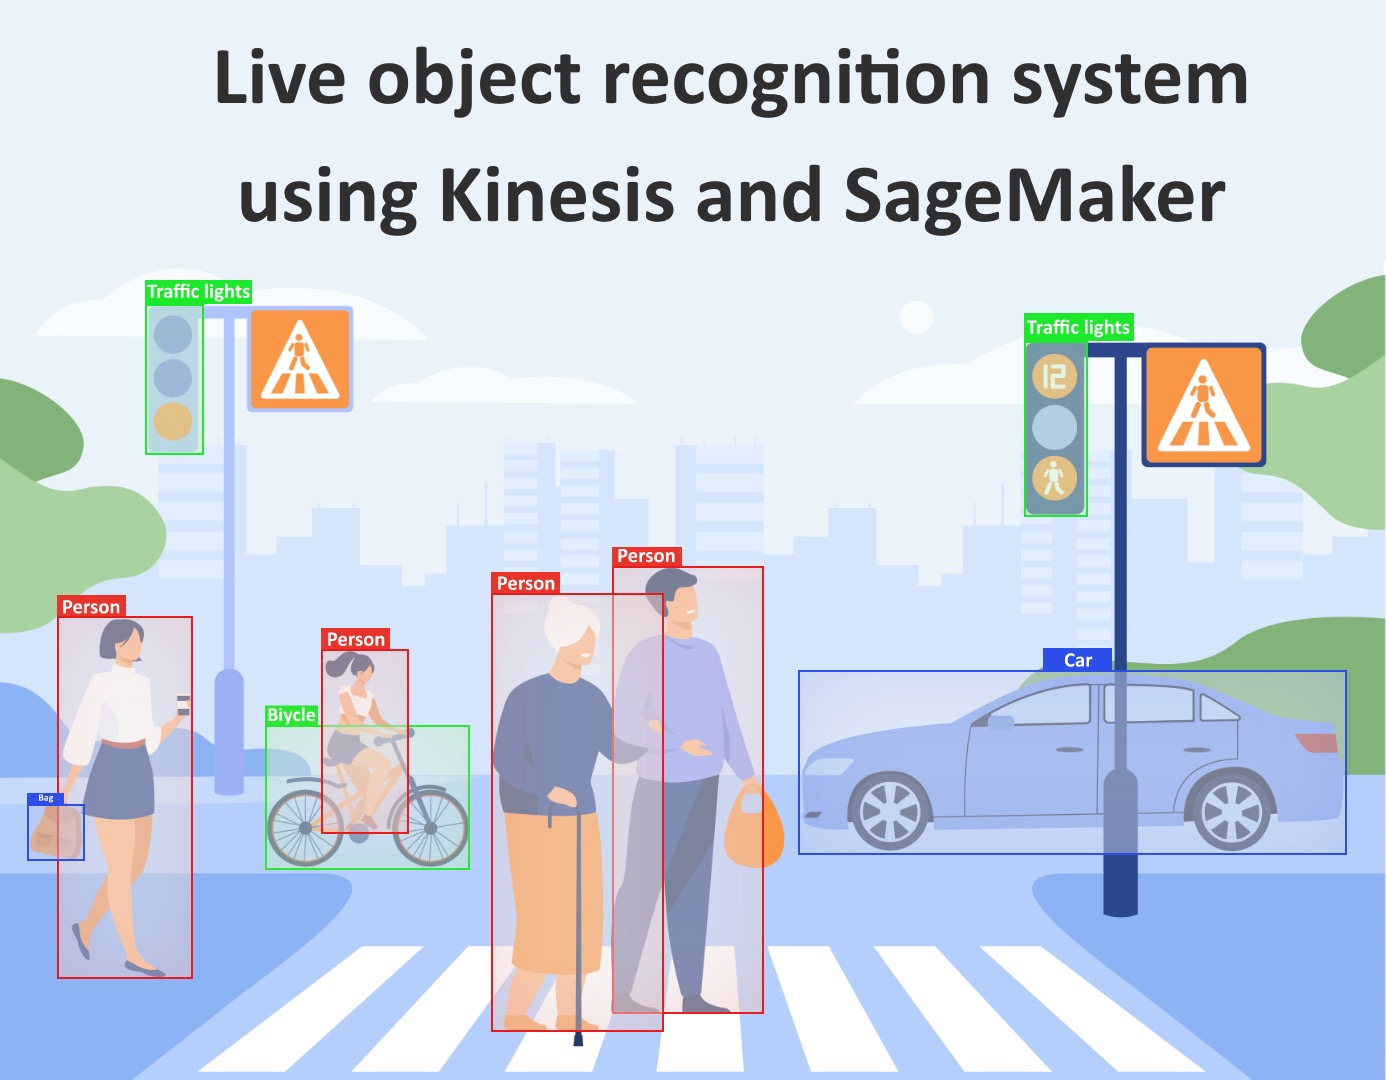 Live object recognition system using Kinesis and SageMaker